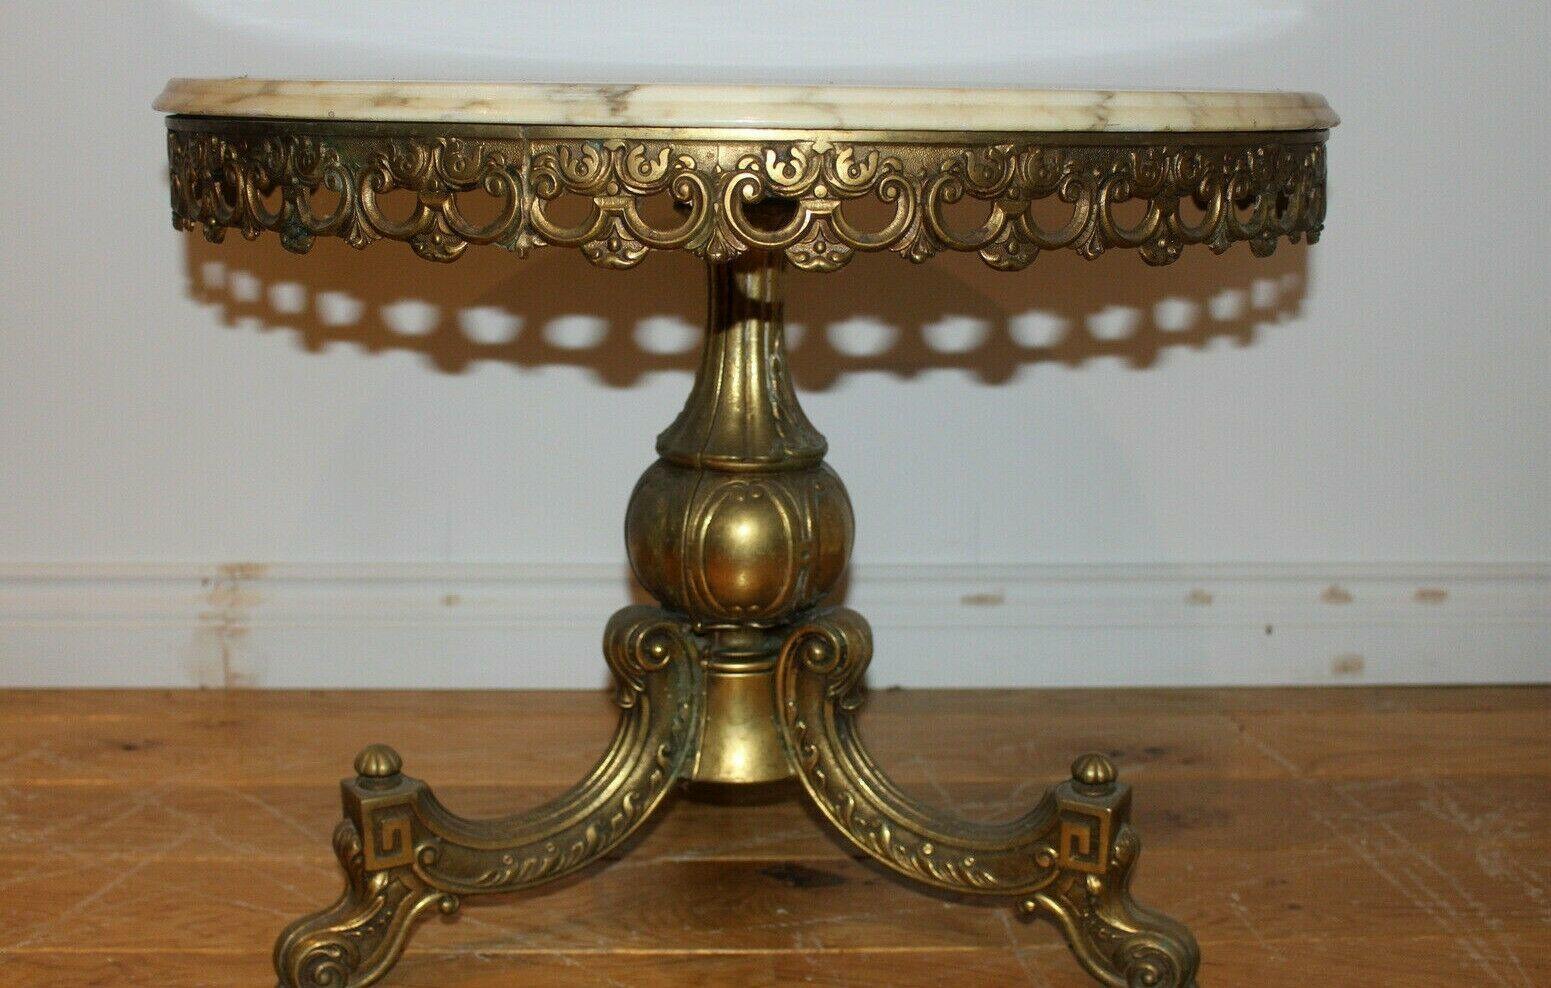 Engraved Italian Rococo Onyx Marble Coffee Table Brass Vintage Circular Console 1960 For Sale